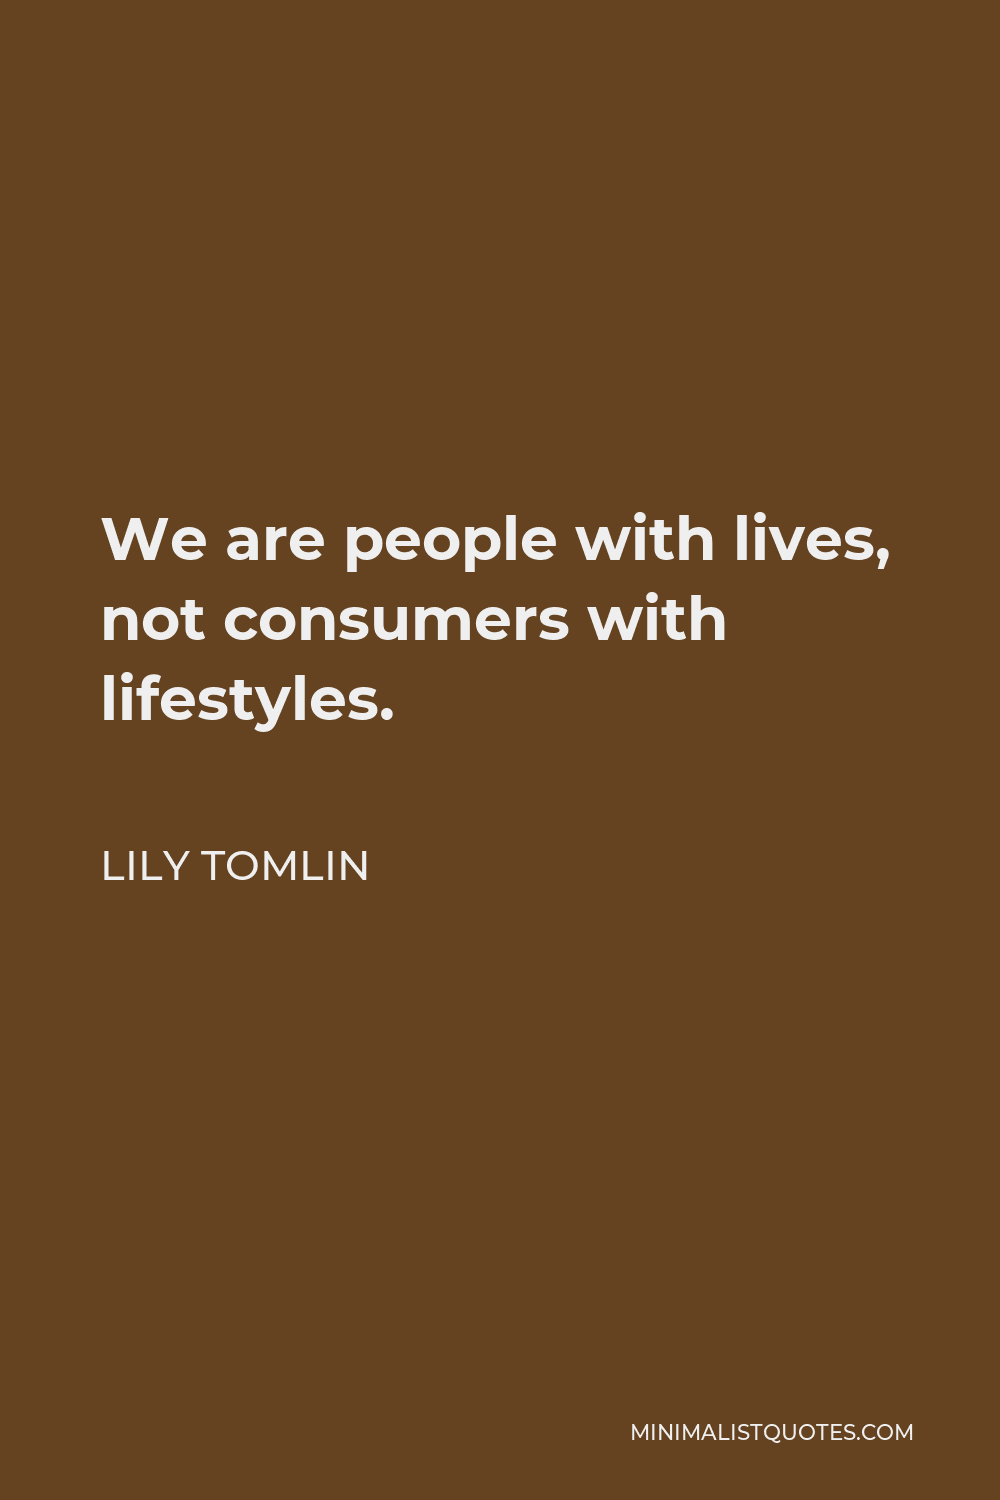 Lily Tomlin Quote - We are people with lives, not consumers with lifestyles.